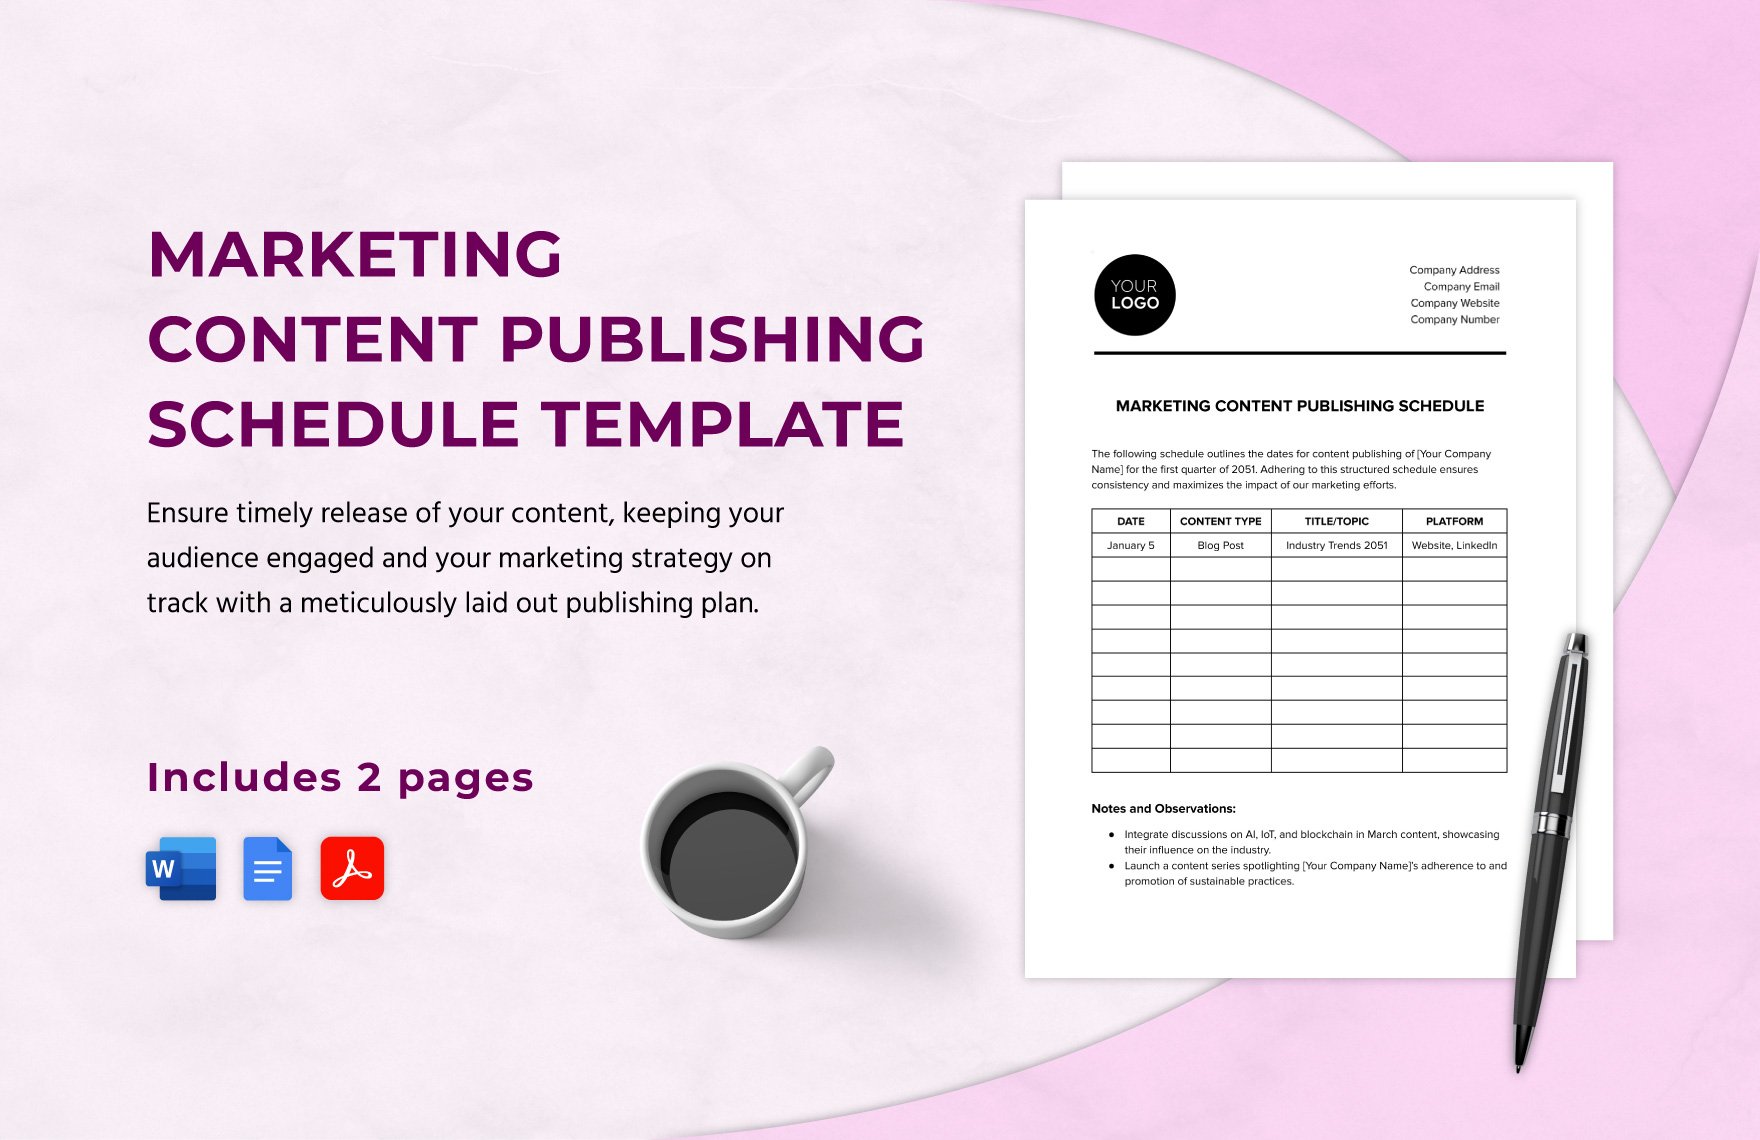 Marketing Content Publishing Schedule Template in Word, Google Docs, PDF